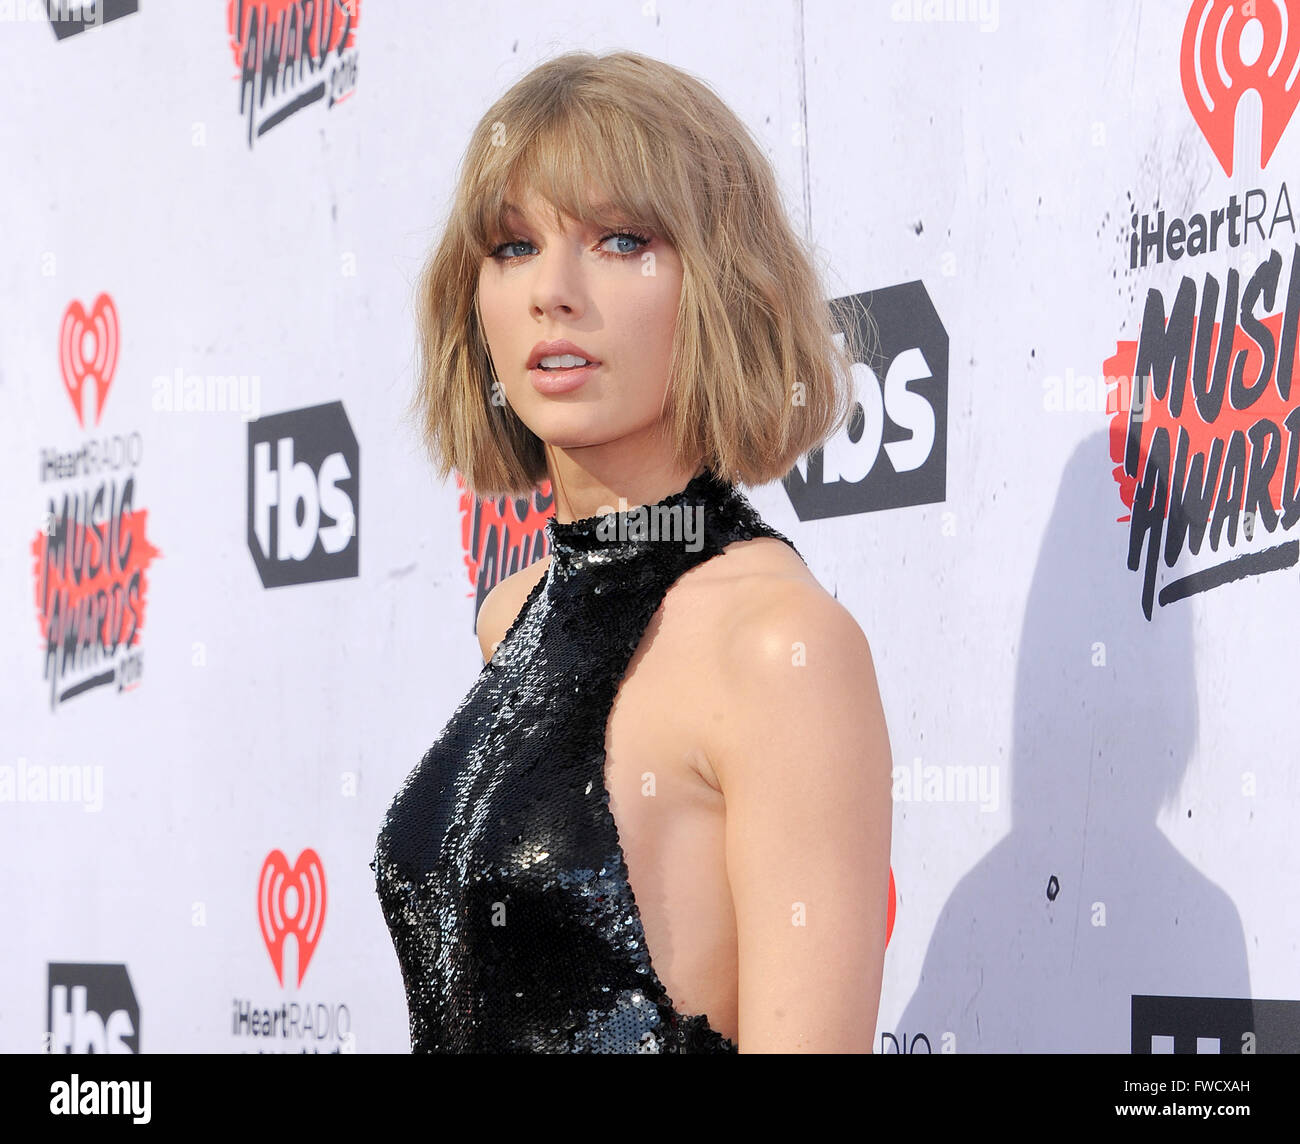 Los Angeles, California, USA. 3rd April, 2016. Taylor Swift at the 2016 iHeartRadio Music Awards held at the Forum in Inglewood, USA on April 3, 2016. Credit:  Hyperstar/Alamy Live News Stock Photo